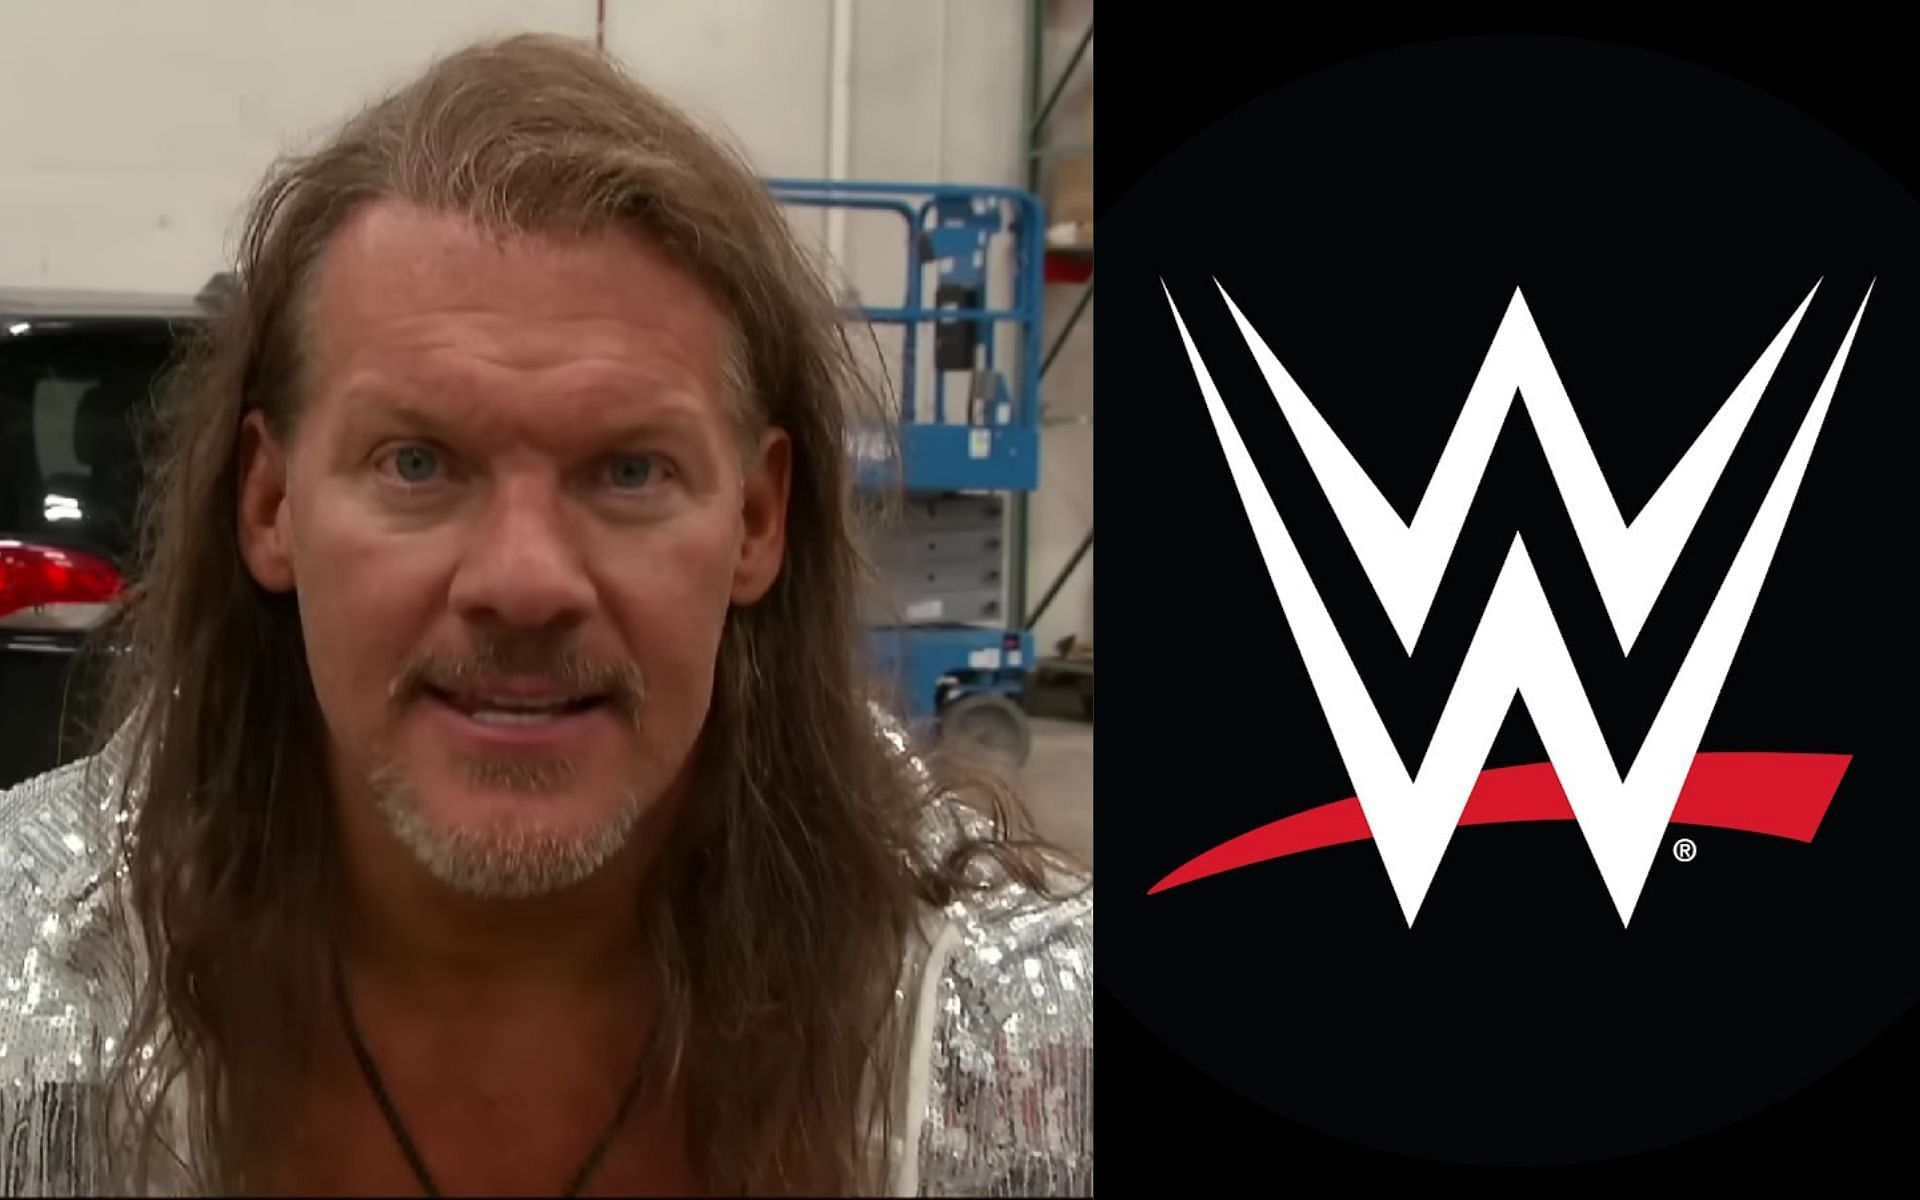 Chris Jericho (left) and WWE logo (right).